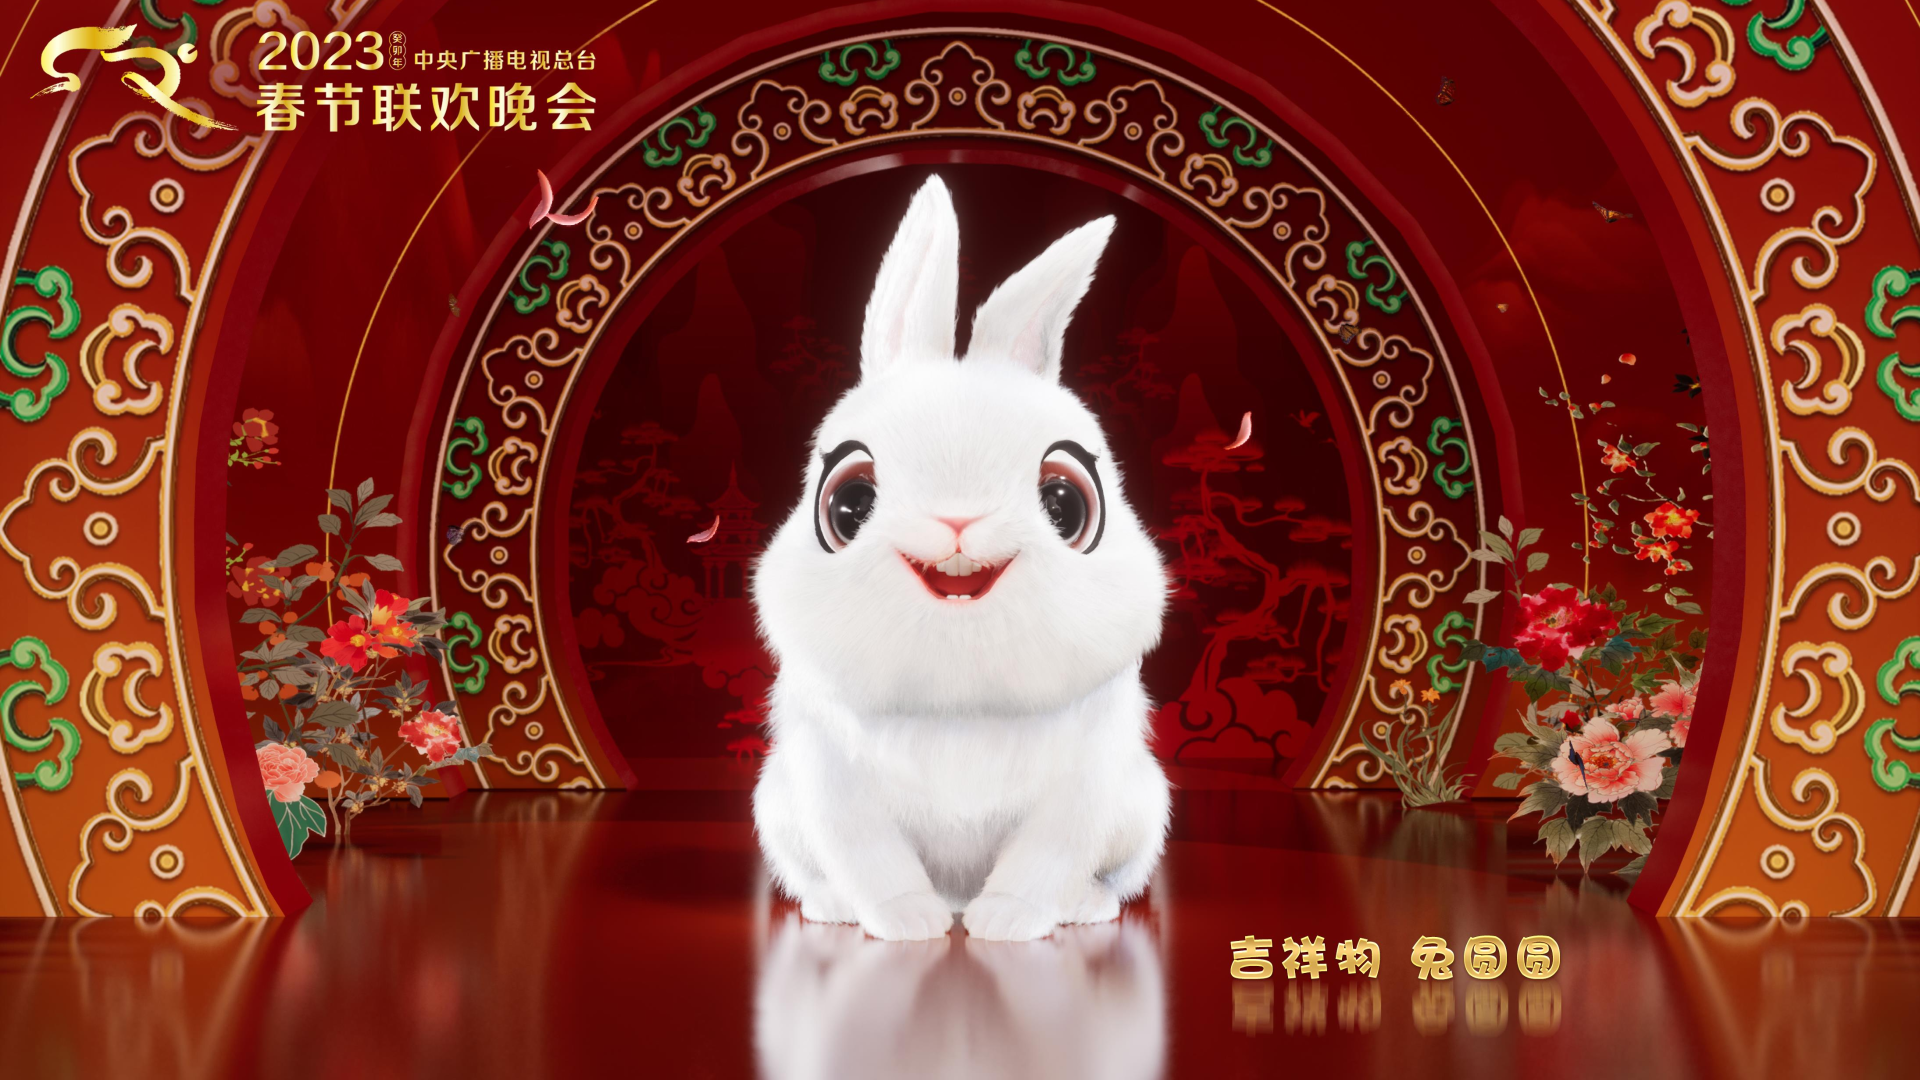 2023 Spring Festival Gala official mascot and logo released